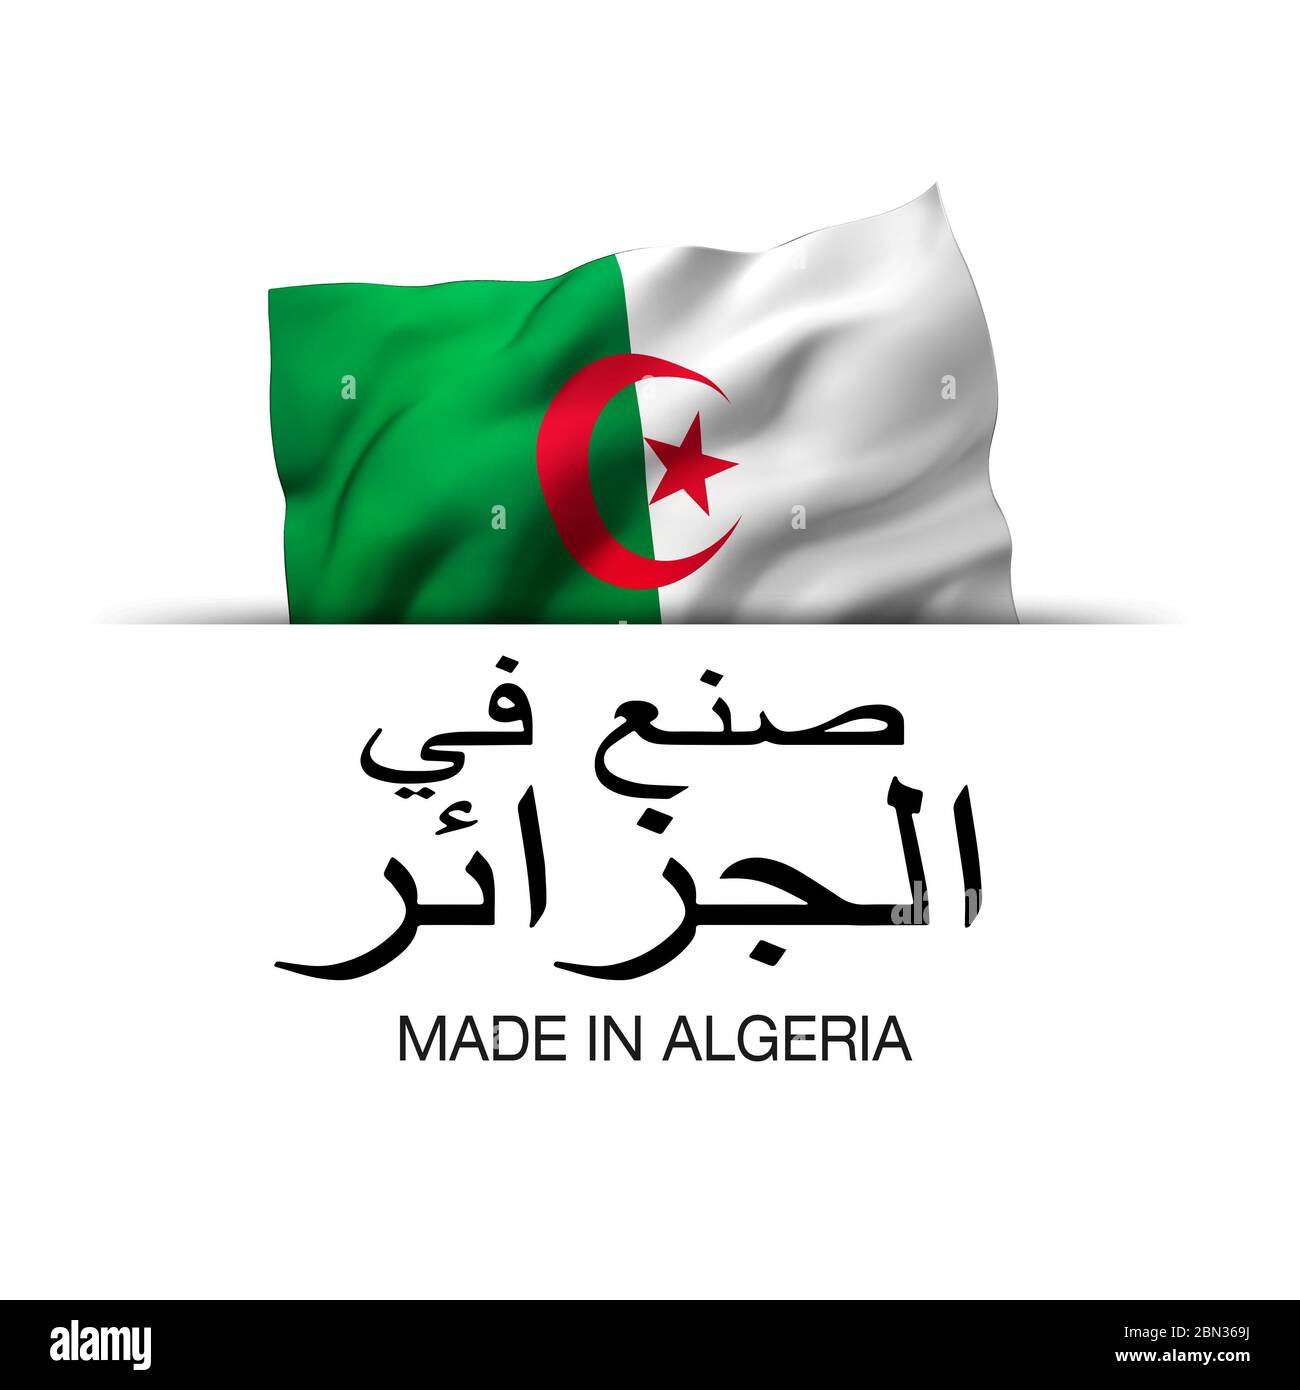 Made in Algeria written in Arabic language. Guarantee label with a waving Algerian flag. 3D illustration. Stock Photo